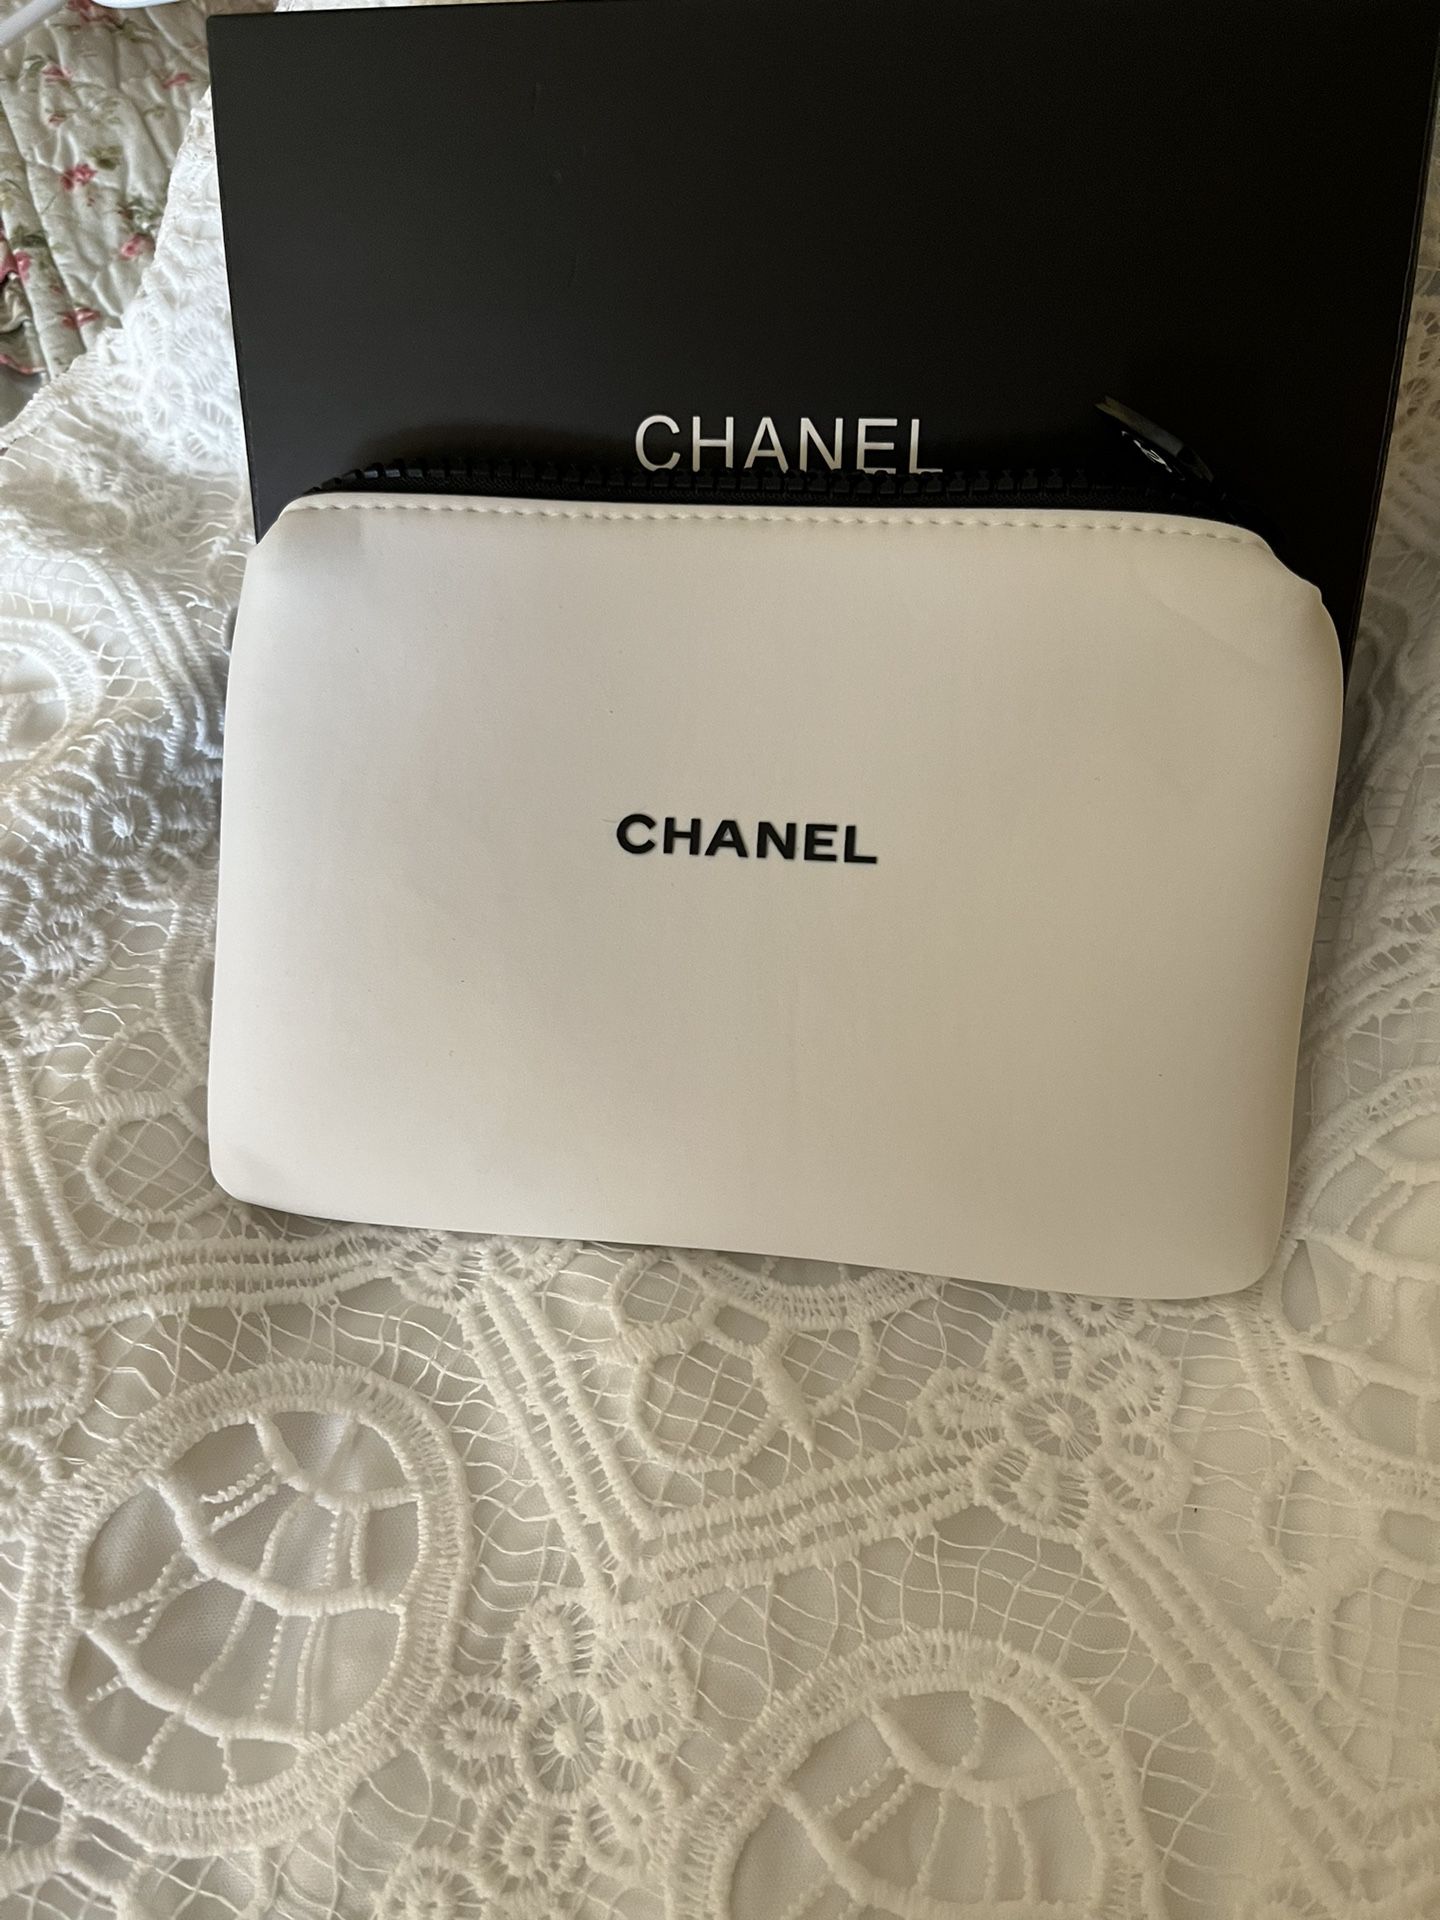 Mesh Makeup Bag for Sale in Montebello, NY - OfferUp